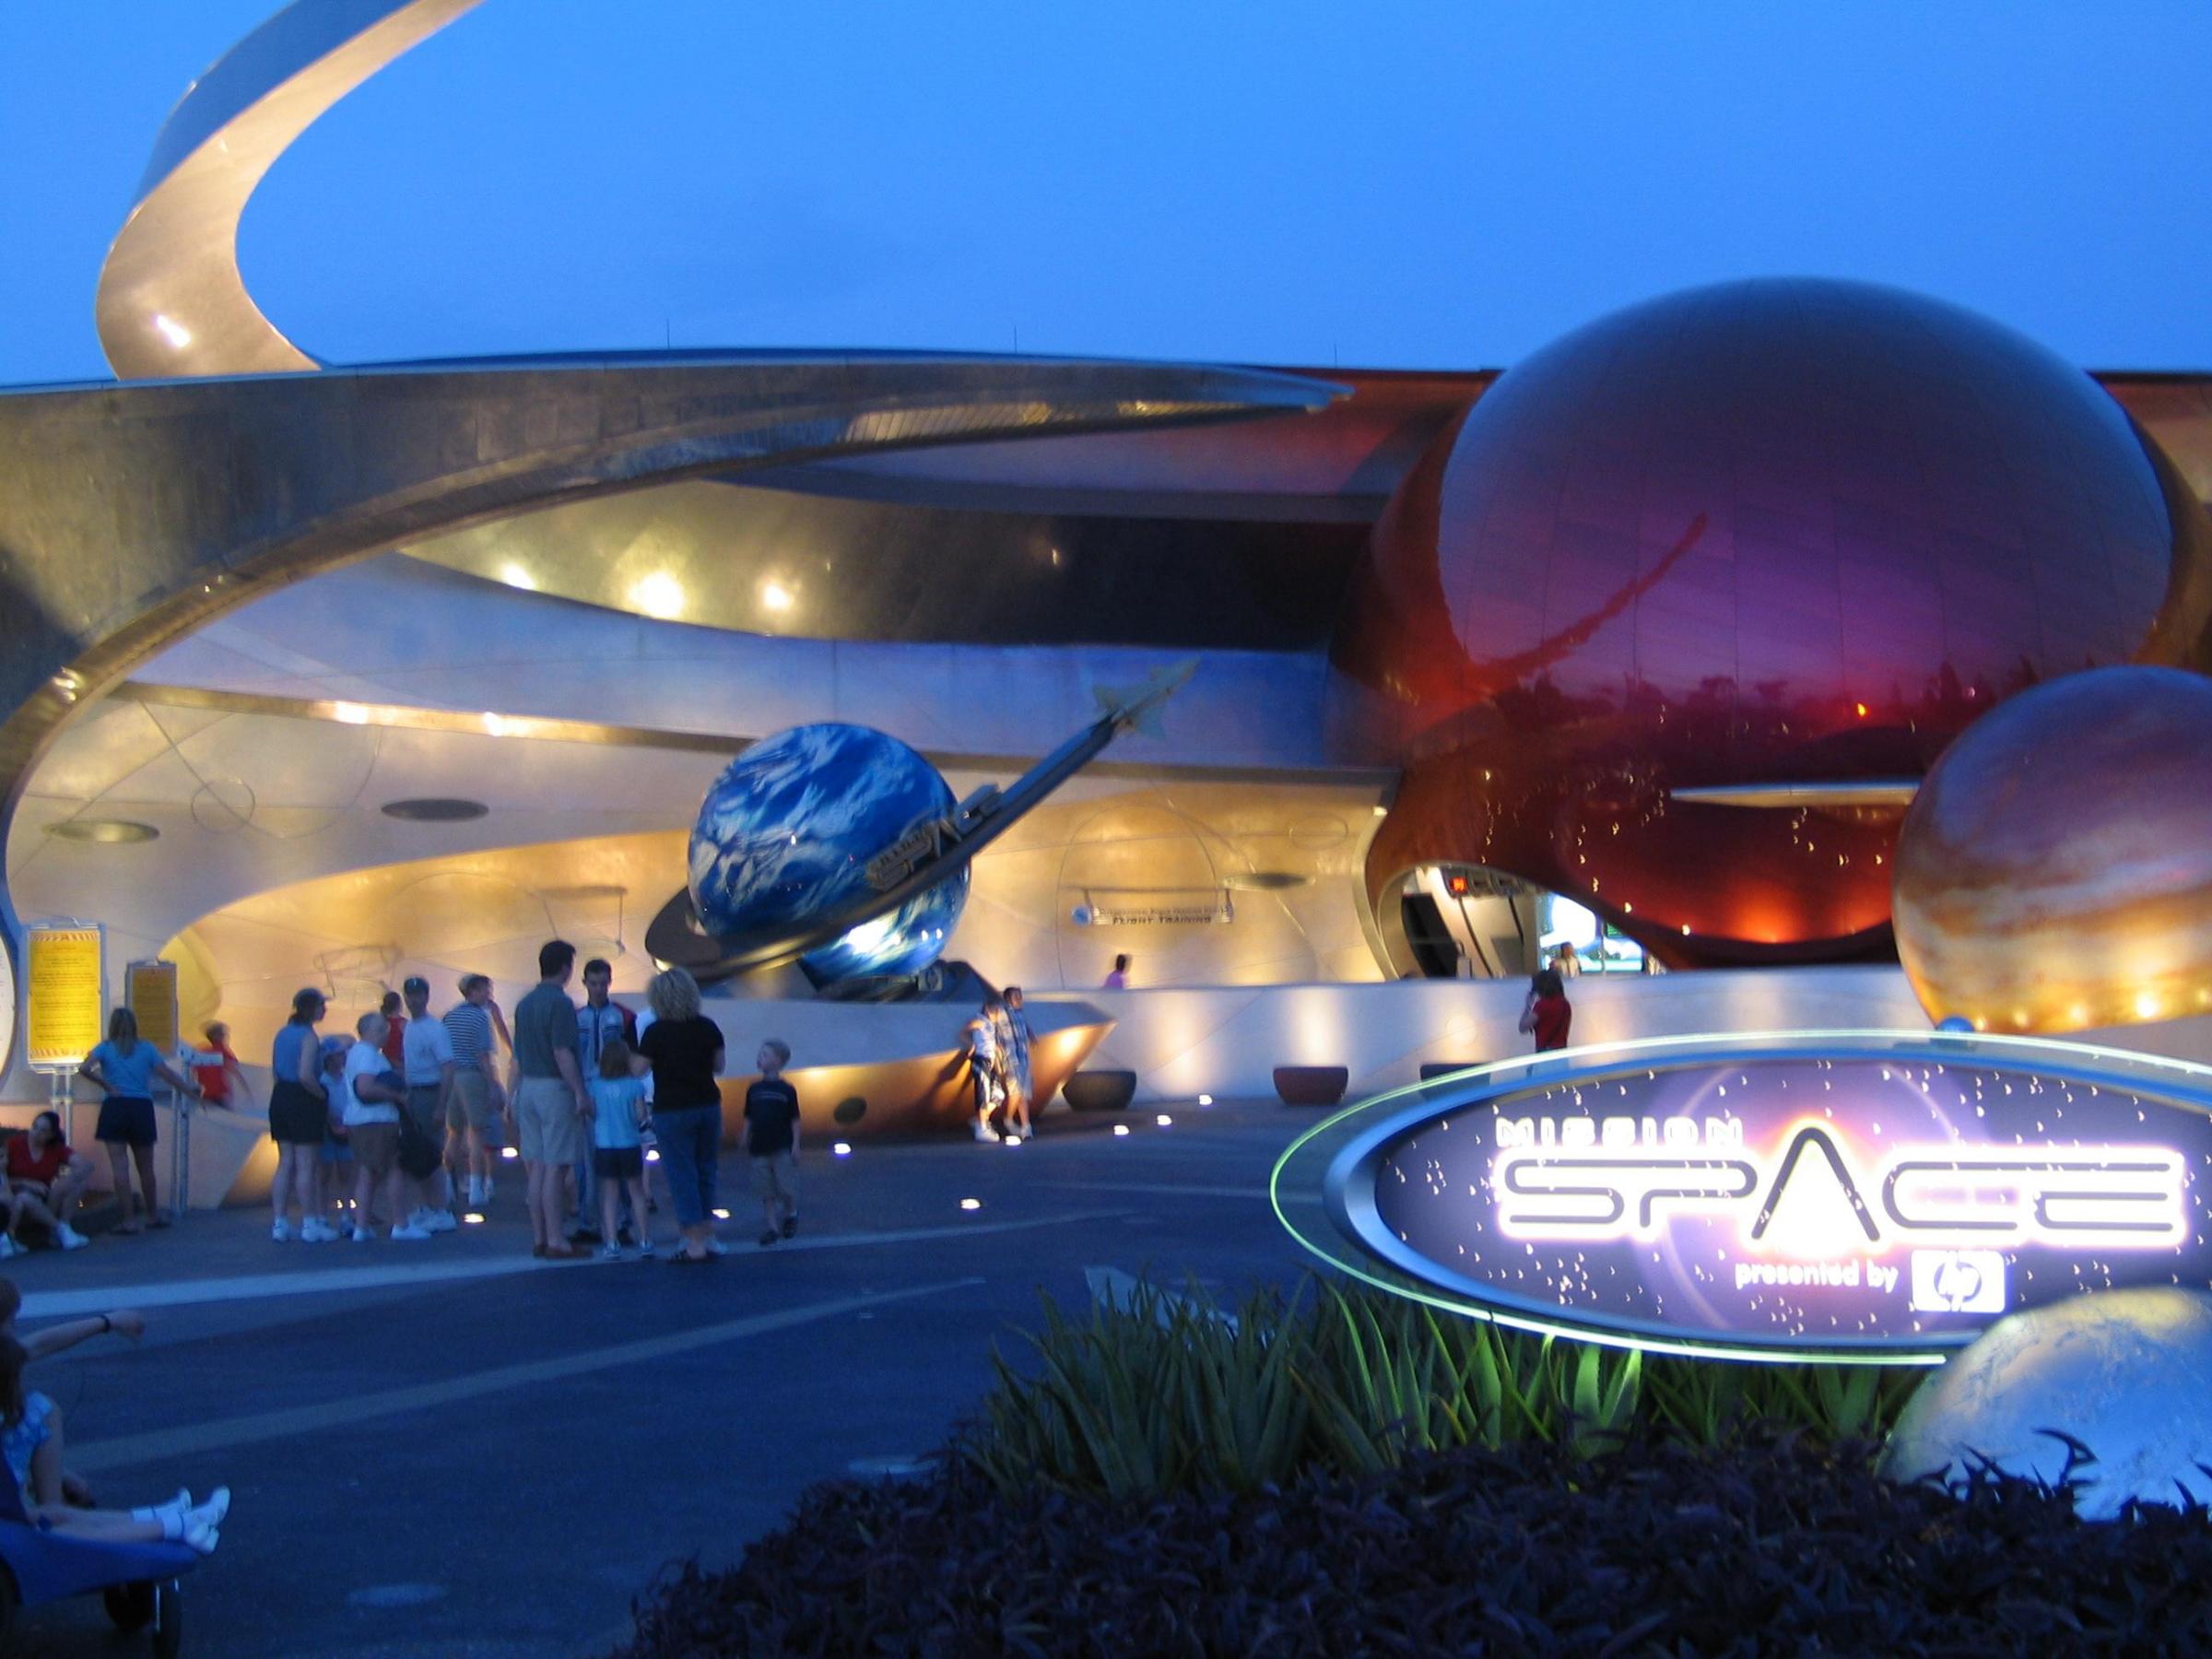 Mission-space-epcot-now-considered-as-a-Permanent-World’s-Fair